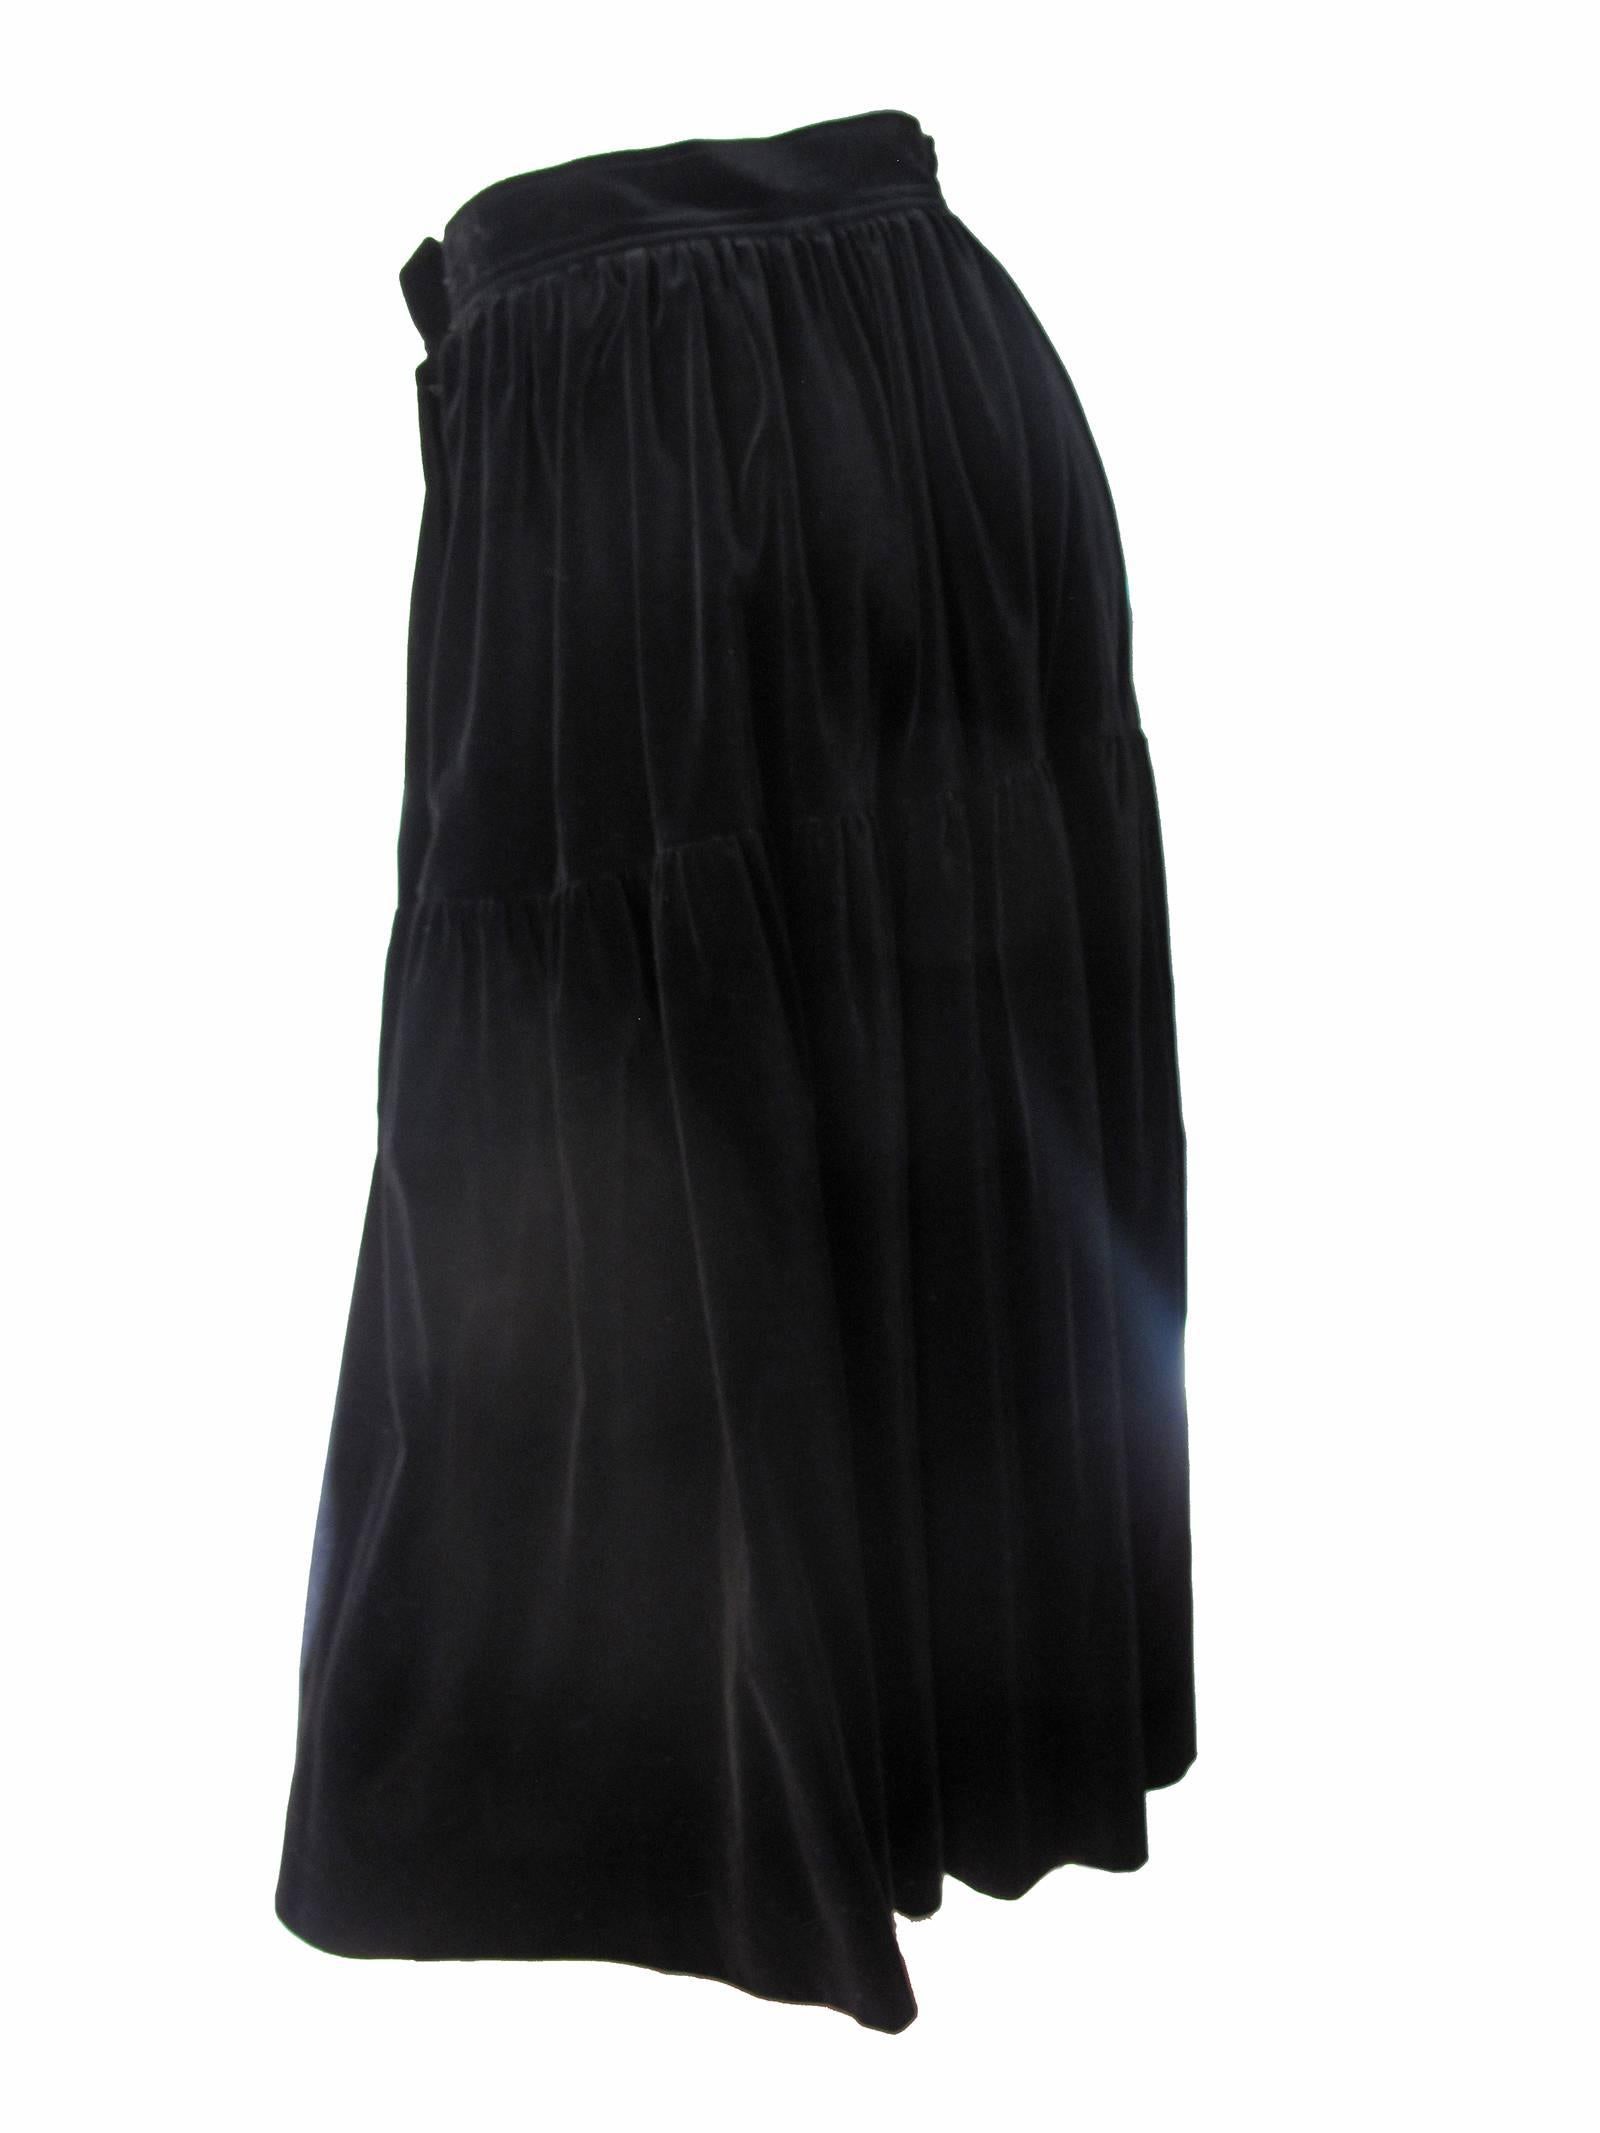 1980s Yves Saint Laurent black velvet peasant skirt.  Condition: Very good. Size 40/ current us 6
We accept returns for refund, please see our terms.  We offer free ground shipping within the US. 
